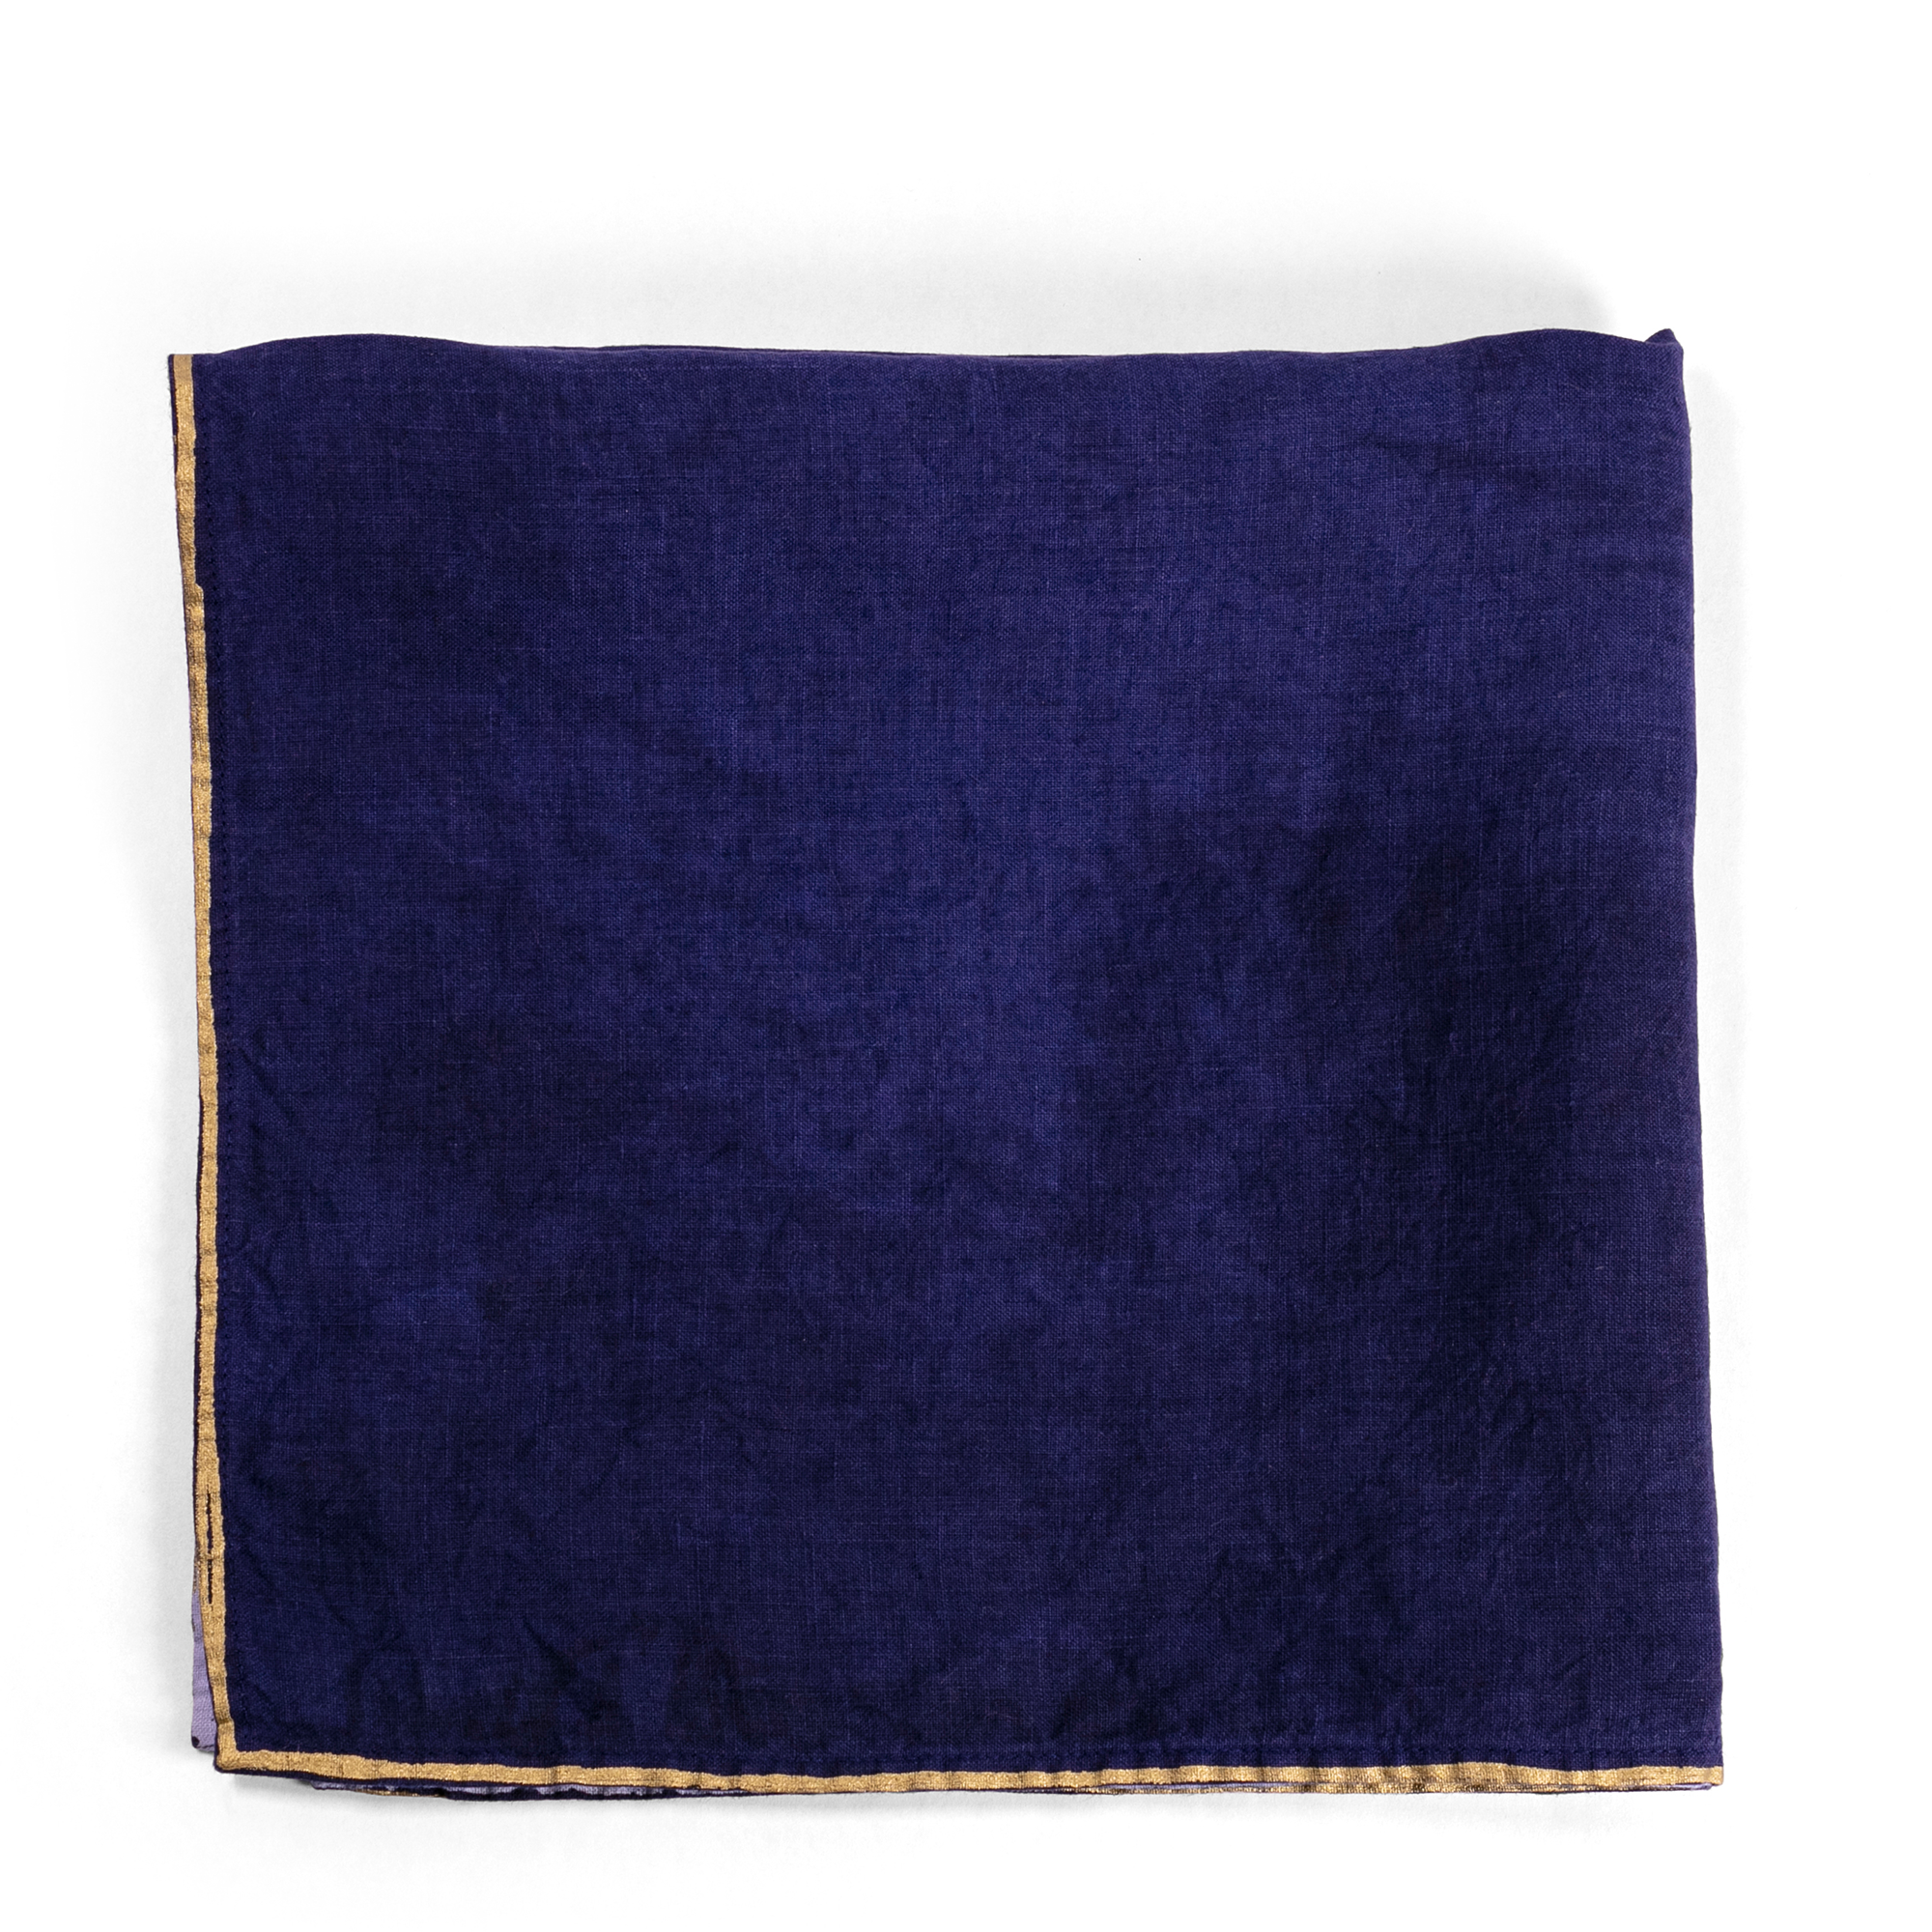 A luxurious indigo linen napkin with a gold-dipped edge, perfect for adding a touch of elegance and contrast to any table setting.